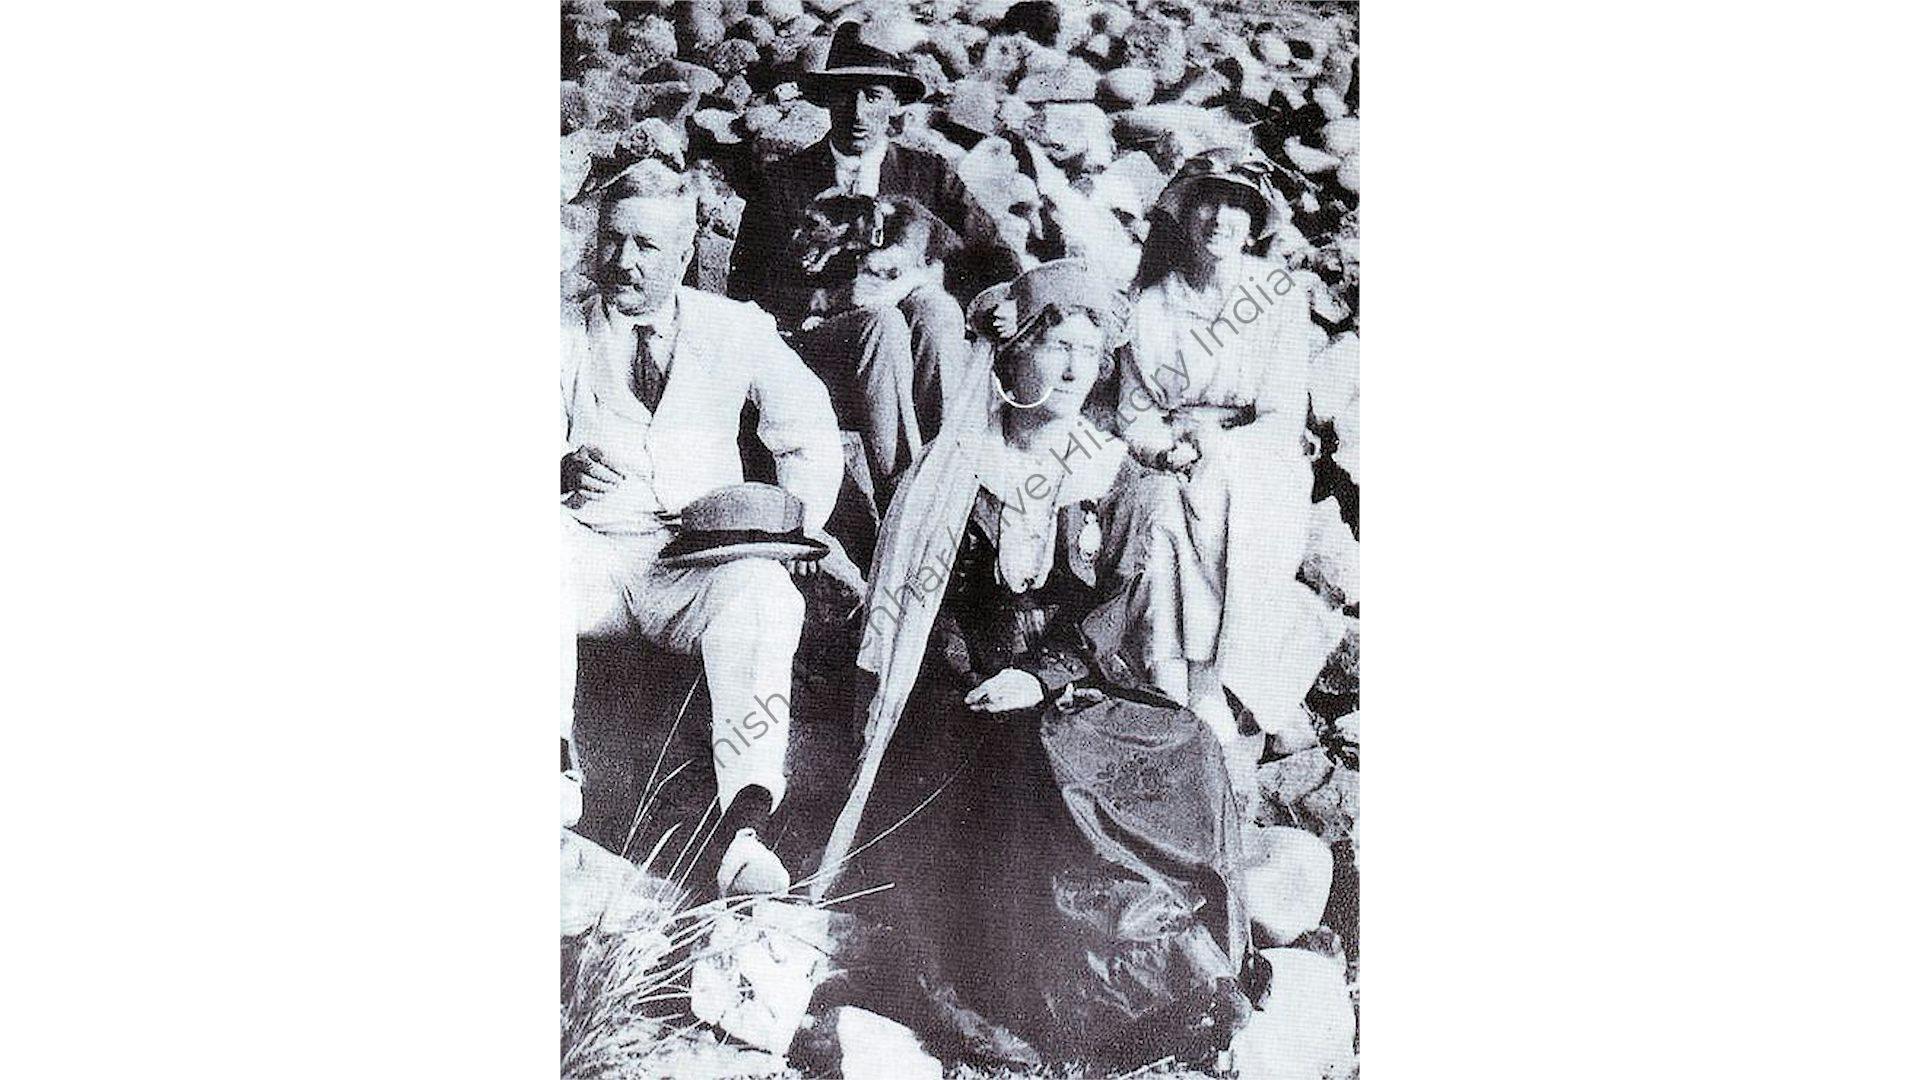 Dyer with his wife Annie Dyer and daughter